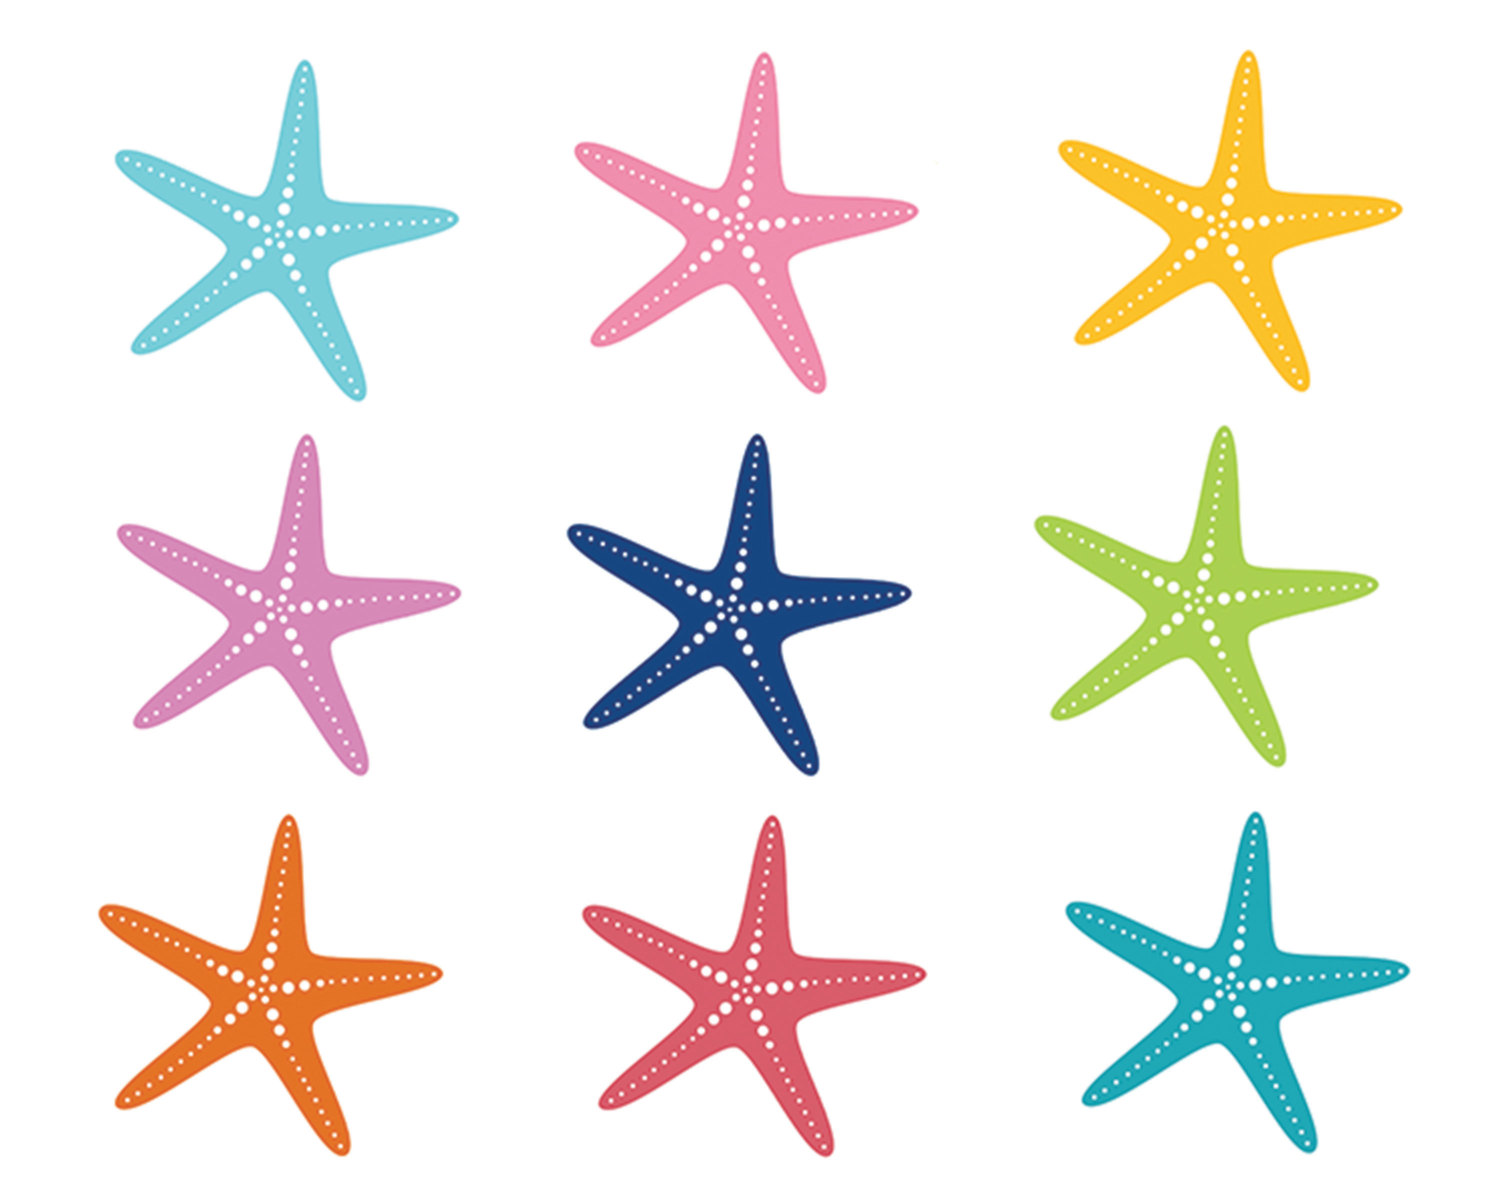 Starfish craft outline clipart image #9450